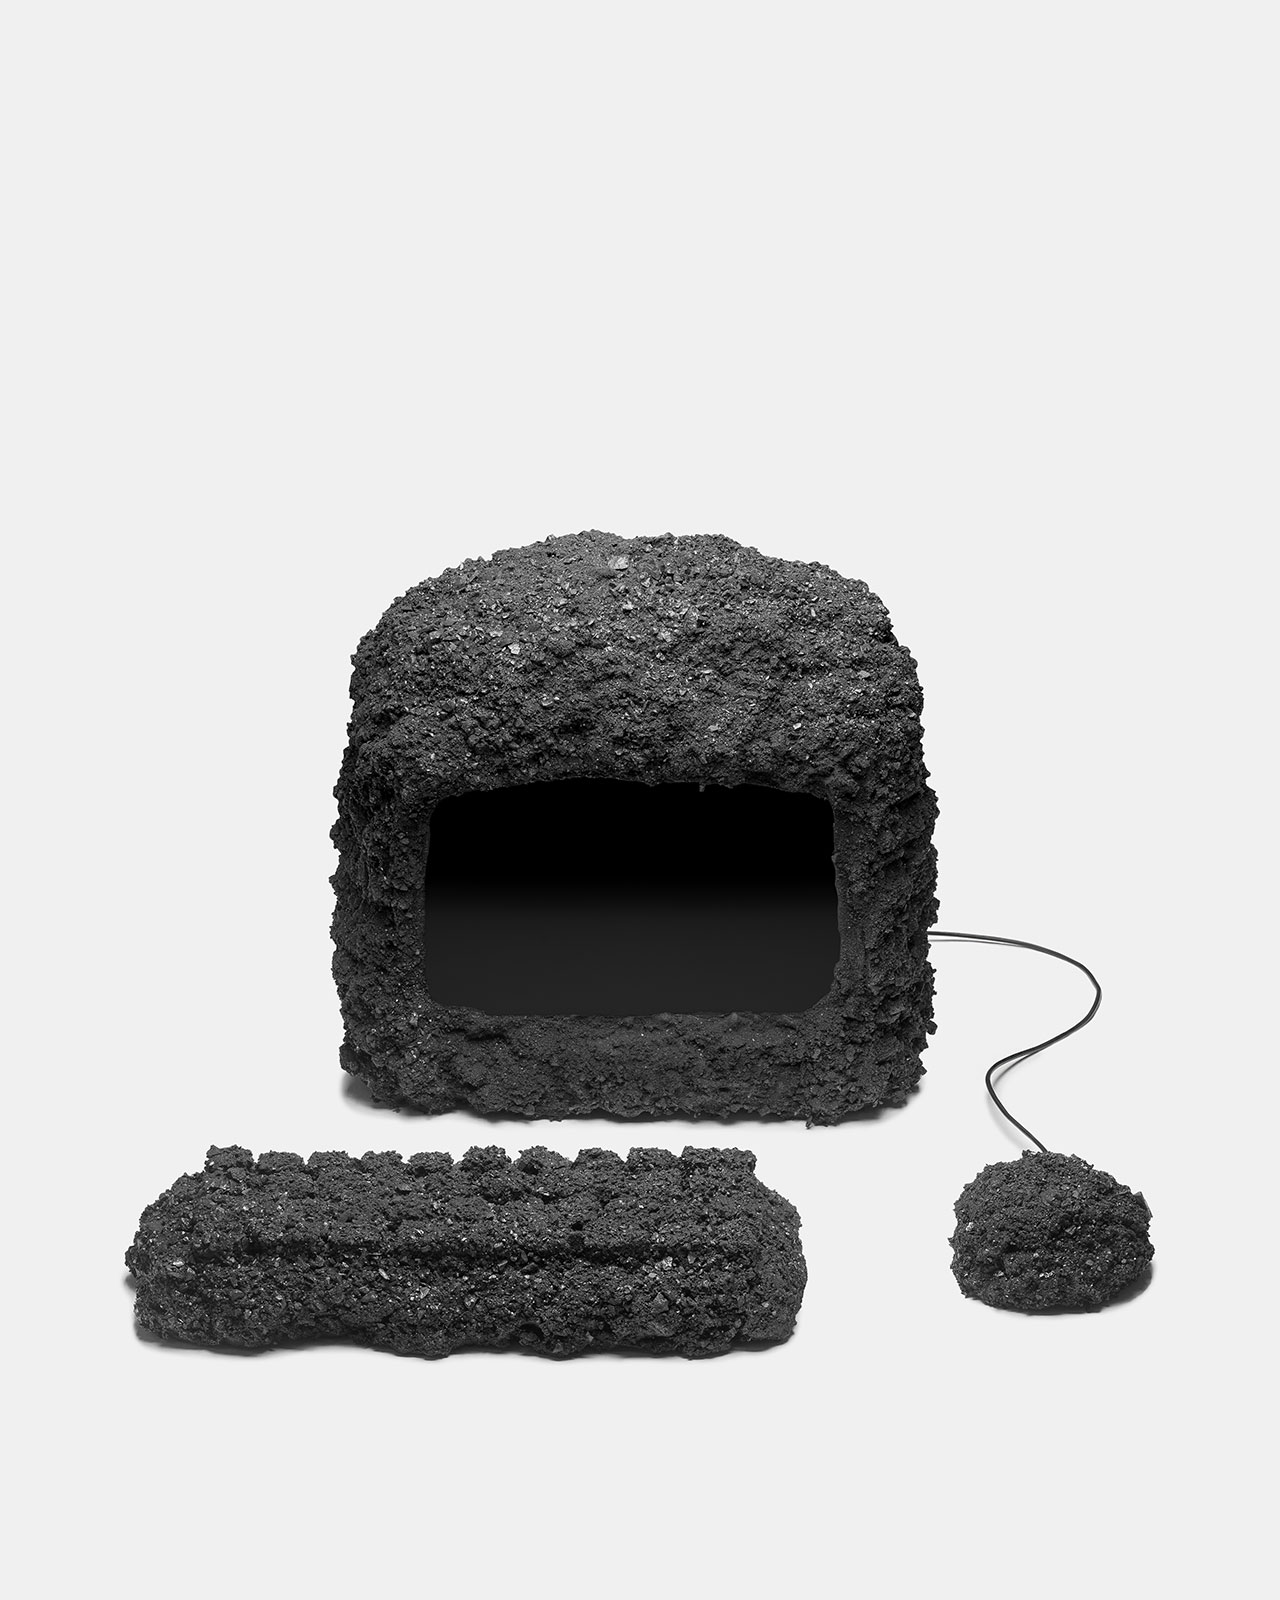 For the Rest of Us. A project by Hank Beyer and Alex Sizemore.
Coal.